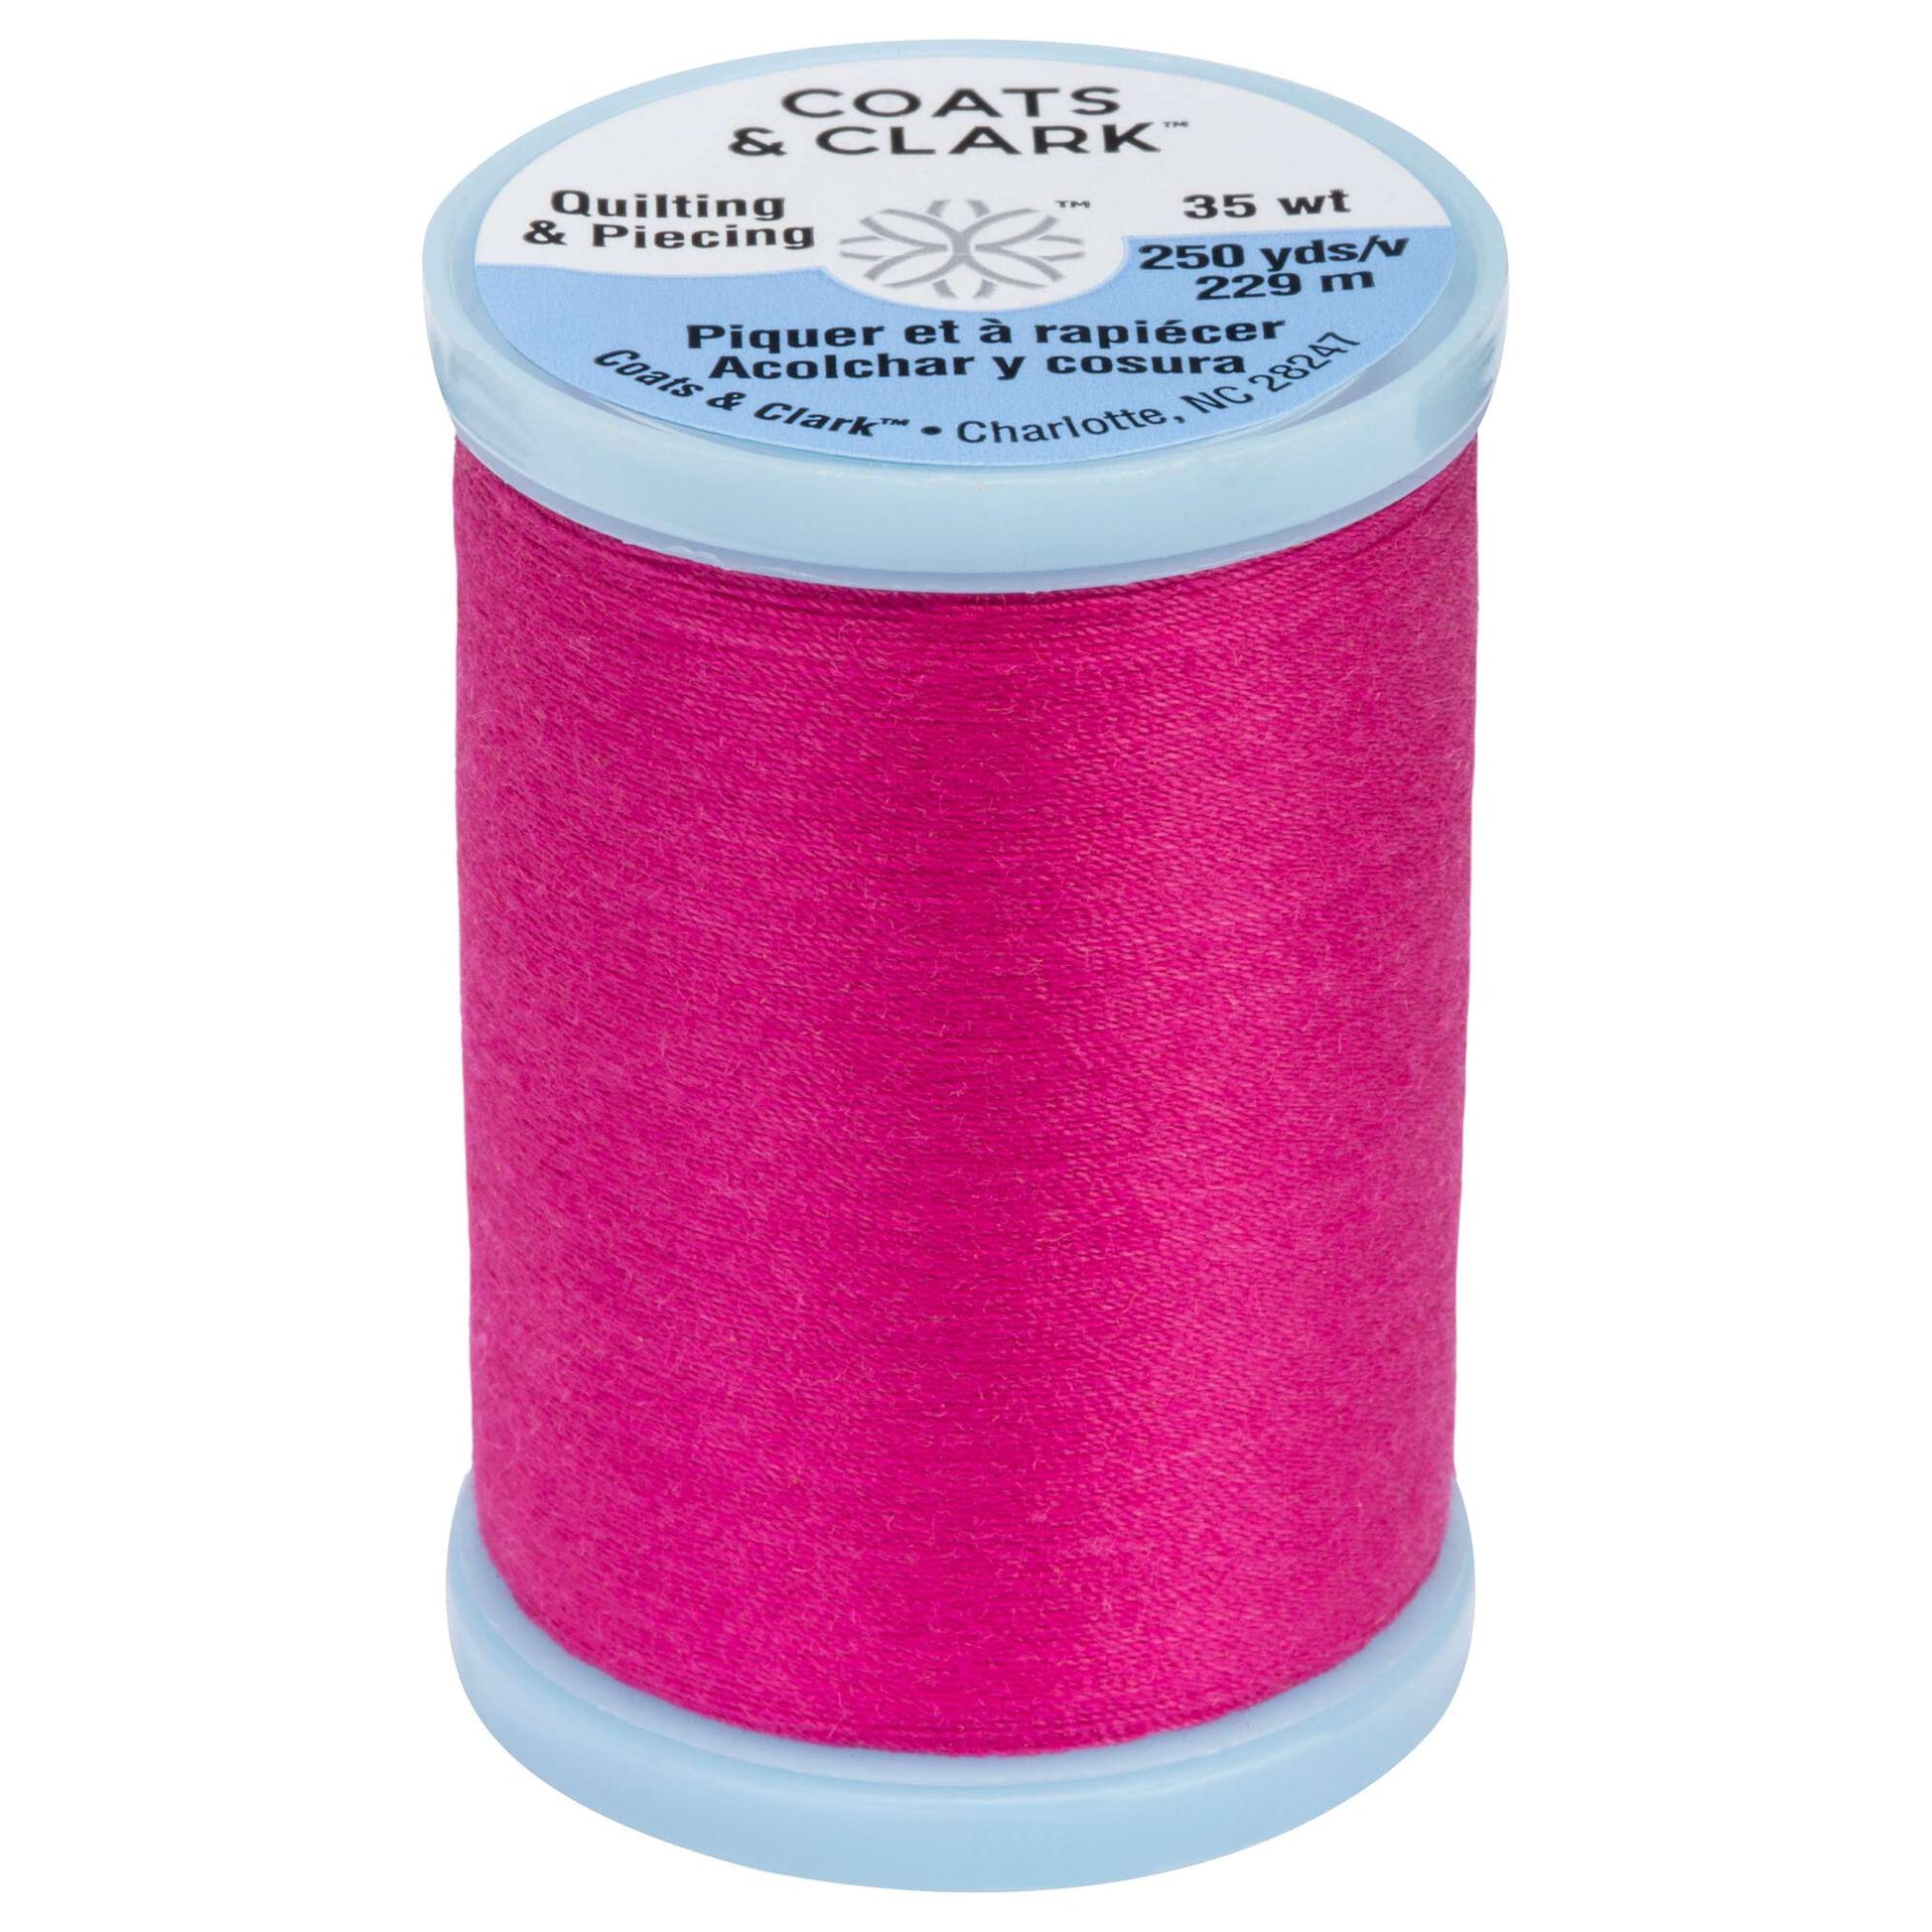 Coats & Clark Cotton Covered Quilting & Piecing Thread (250 Yards) Red Rose